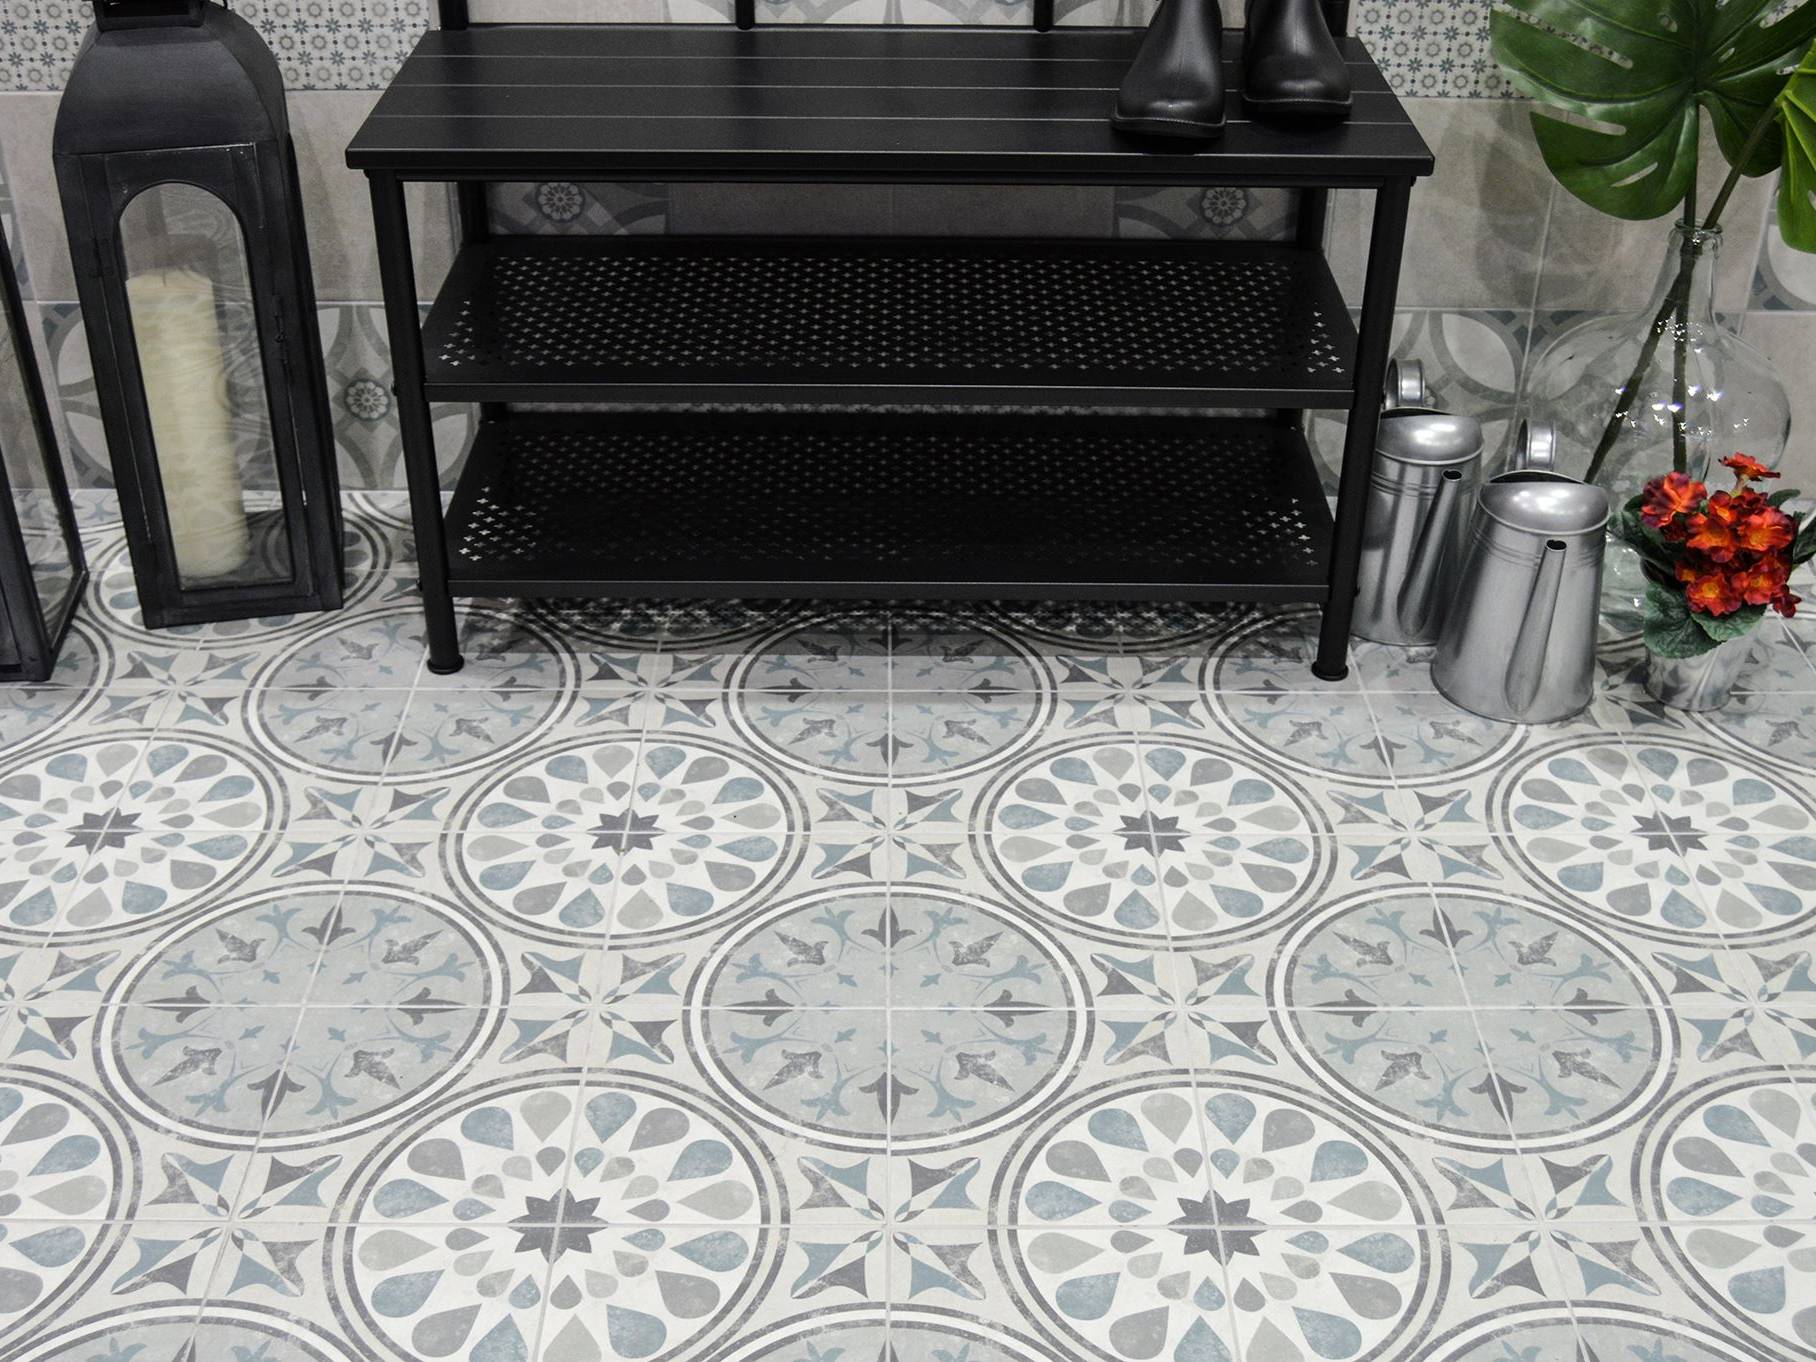 Tapestry Palma 9x9 | Gemini Tile and Marble